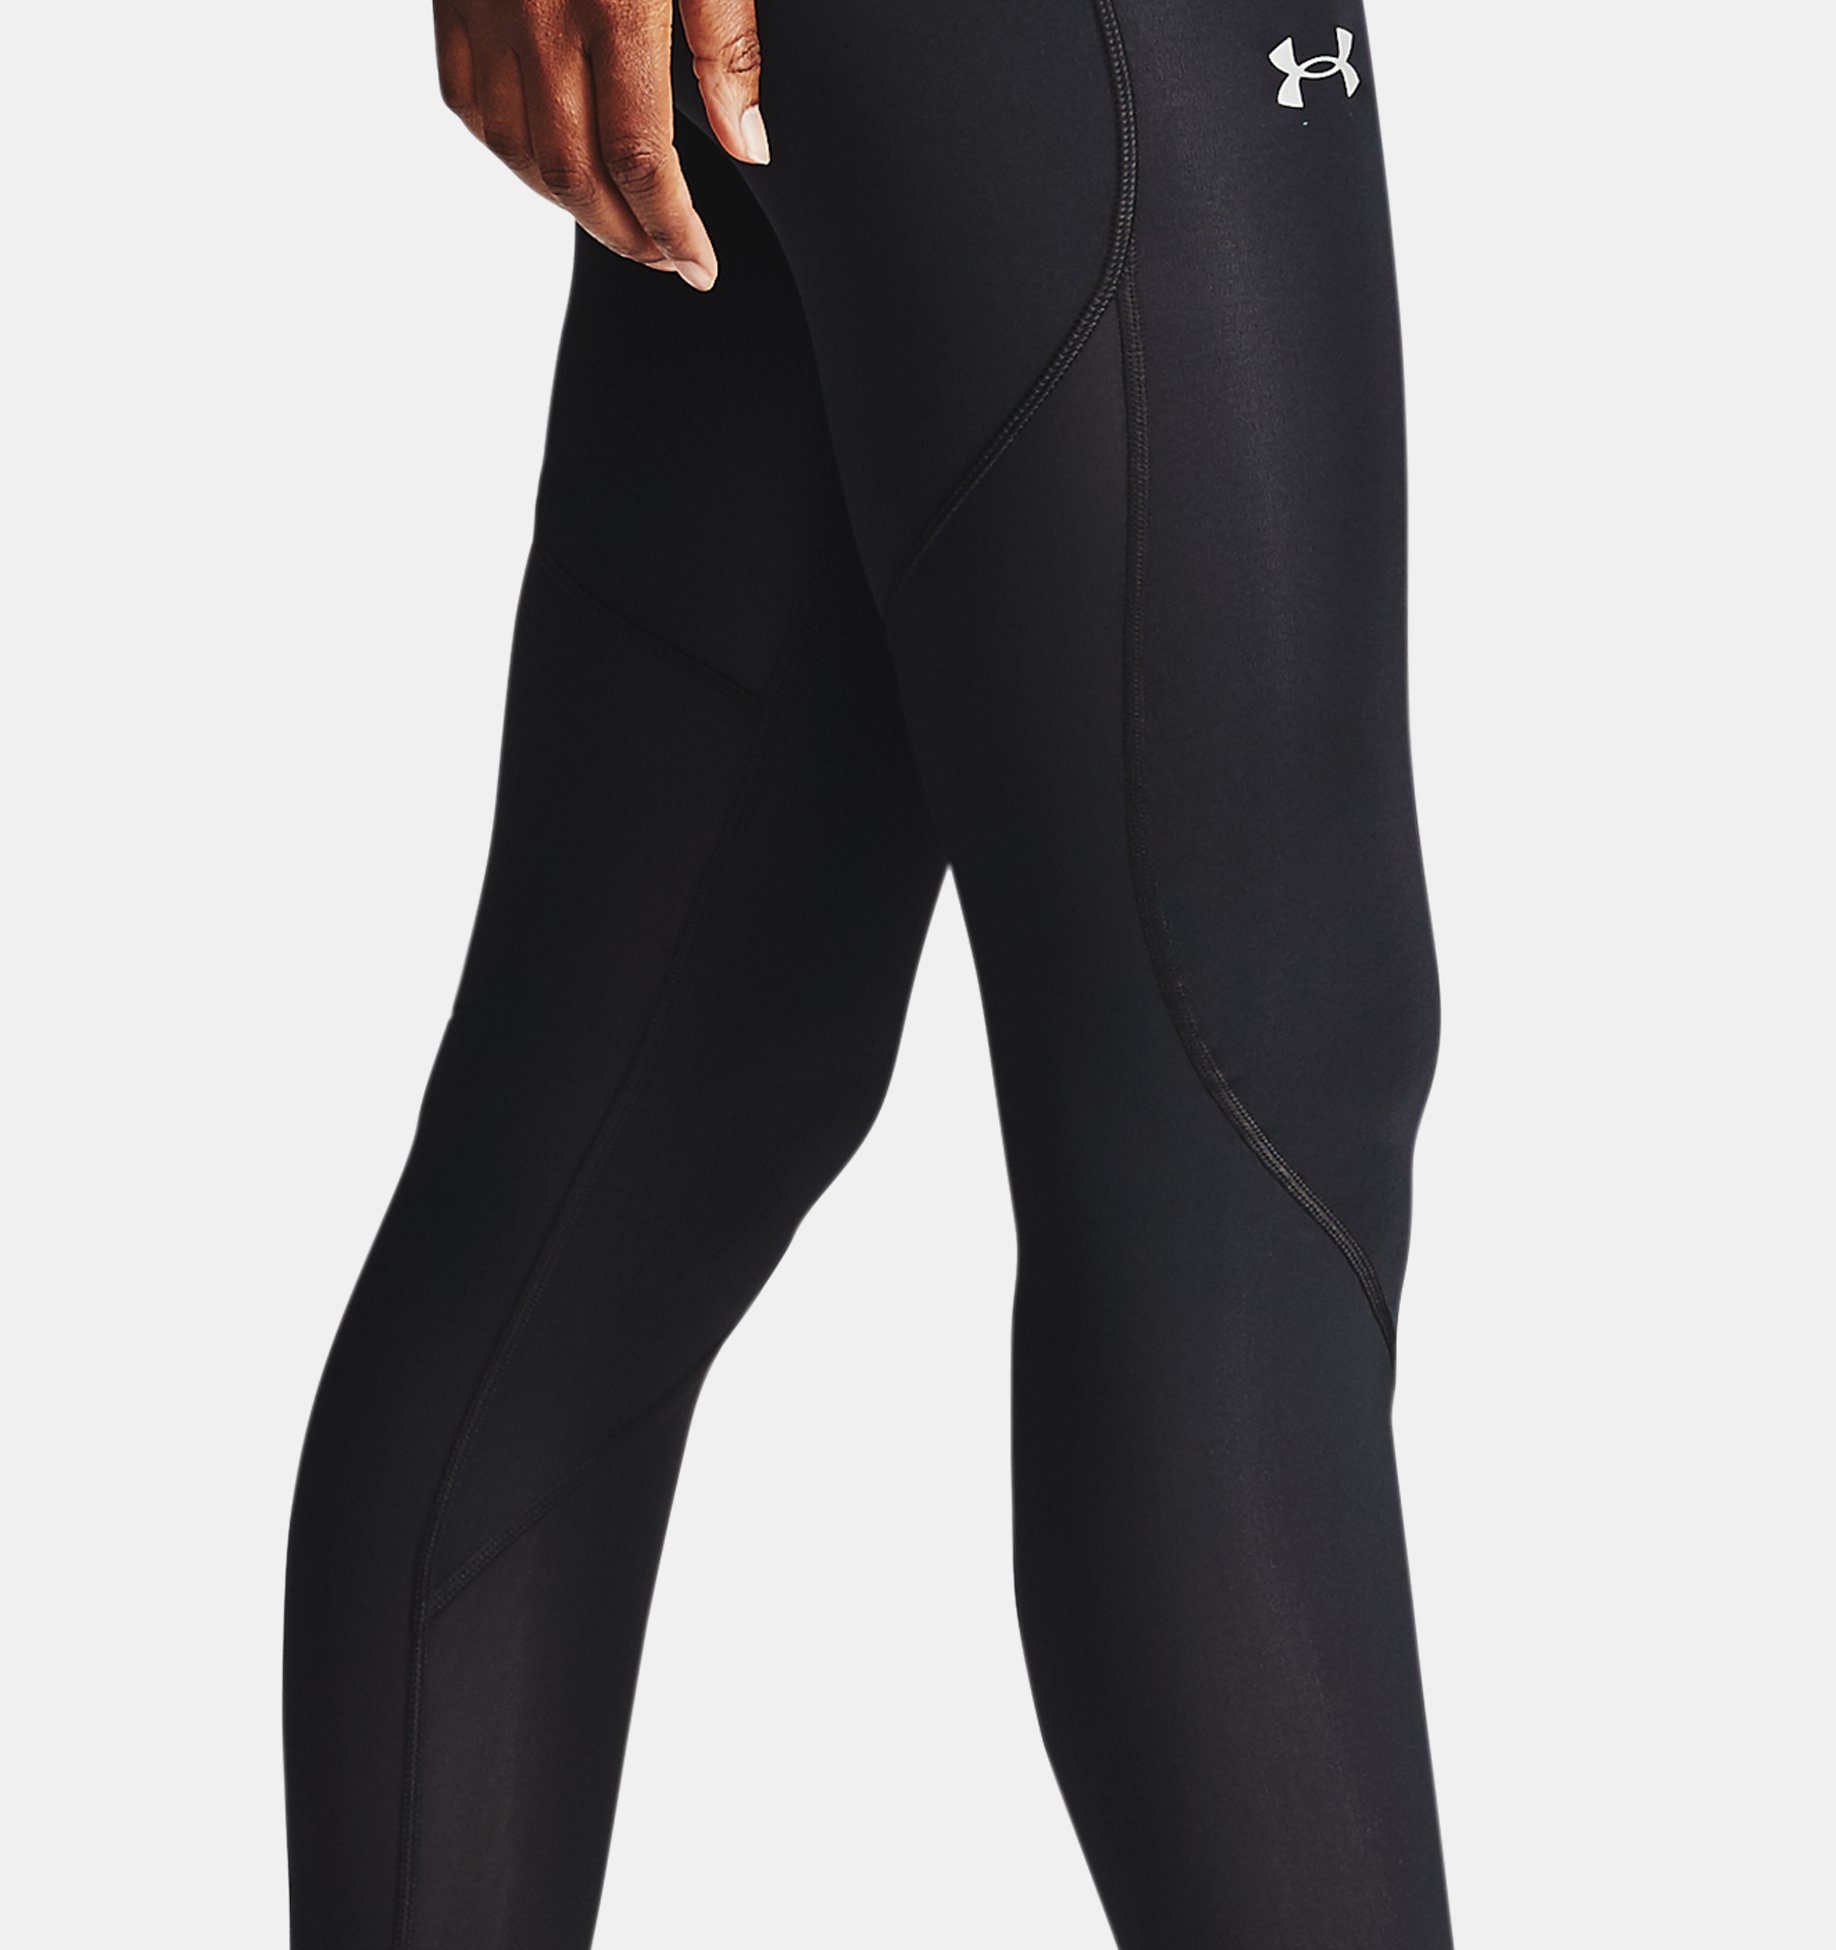 Women Padded Tights – Outgears Fitness